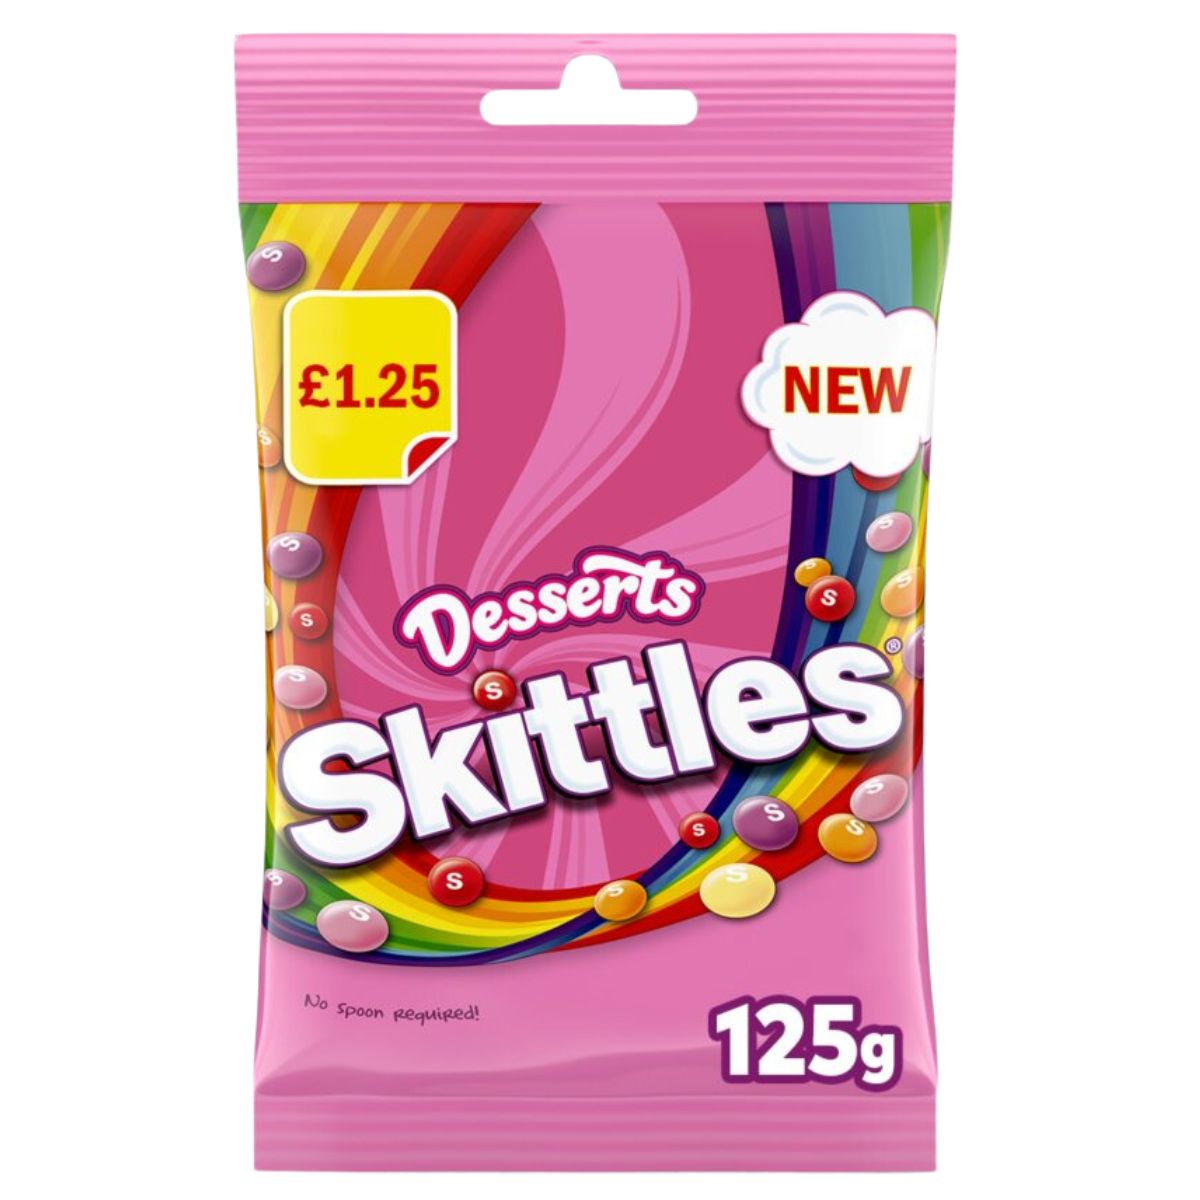 A Skittles - Desserts Treat Bag - 125g on a white background.